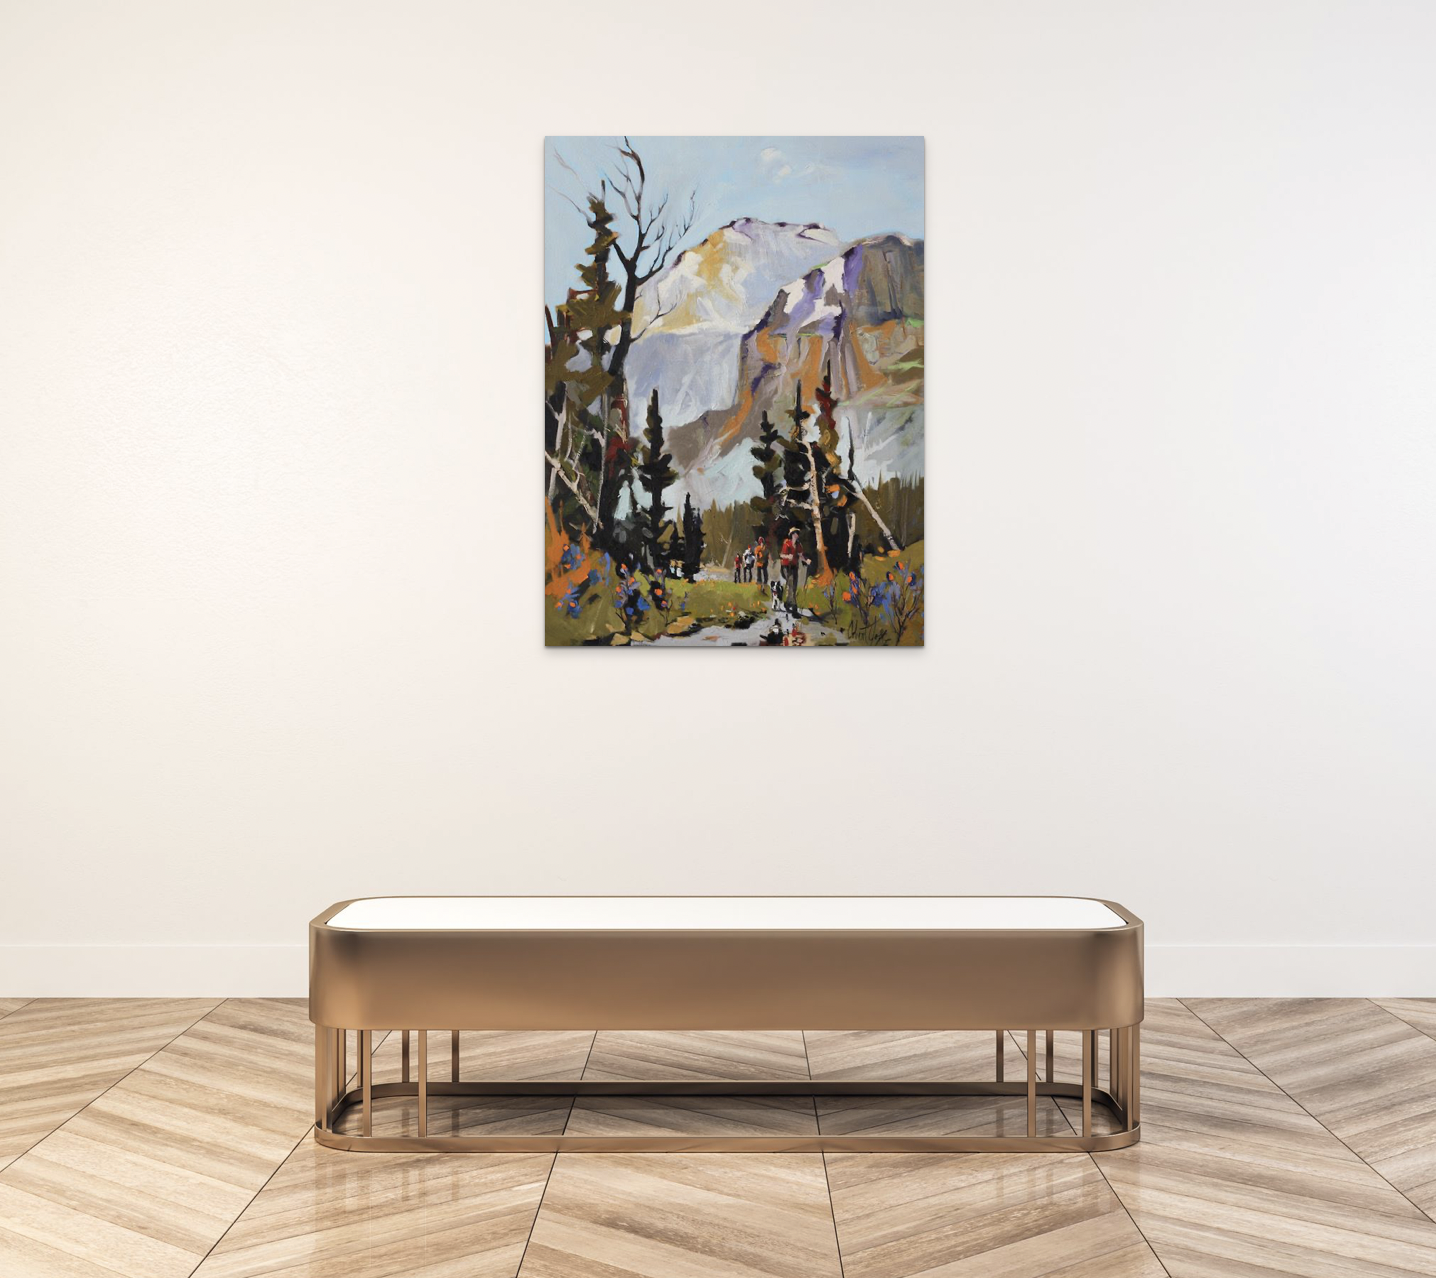 L'aventure, acrylic hiking painting by Robert Roy | Effusion Art Gallery + Cast Glass Studio, Invermere BC